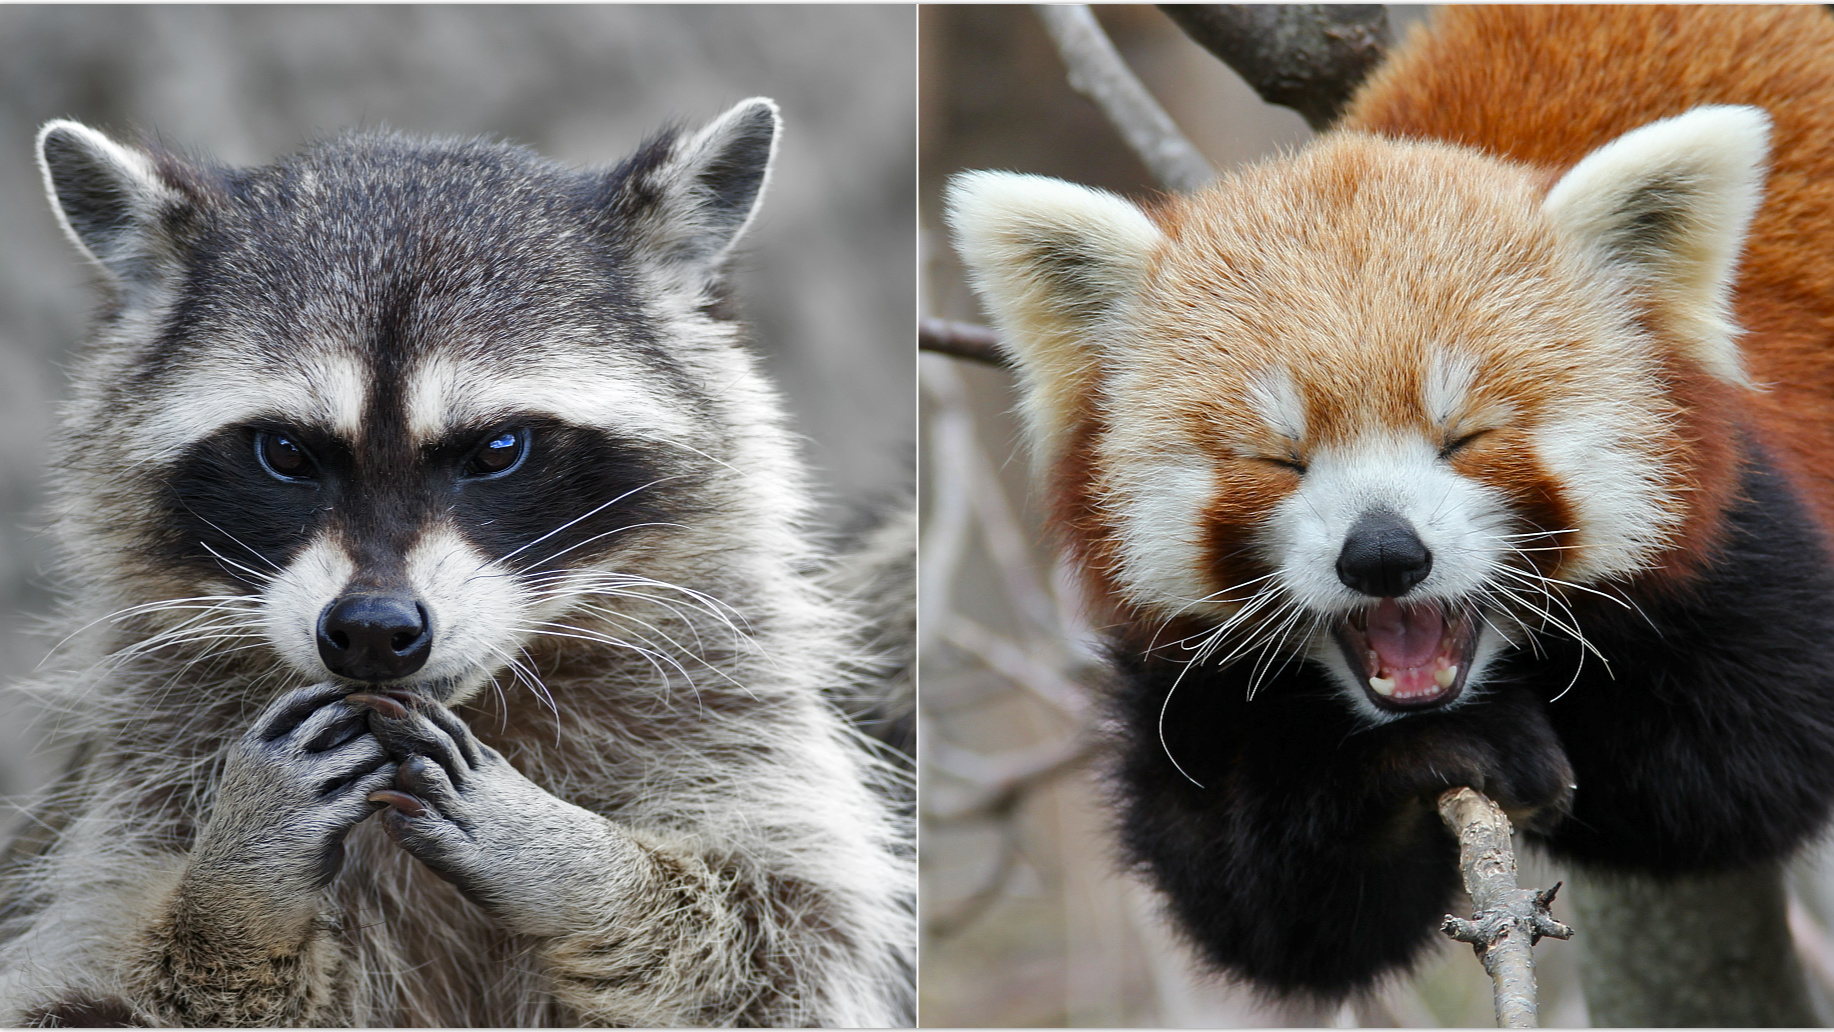 deltager skitse Ordsprog See the difference! Is Master Shifu a red panda or a raccoon? - CGTN